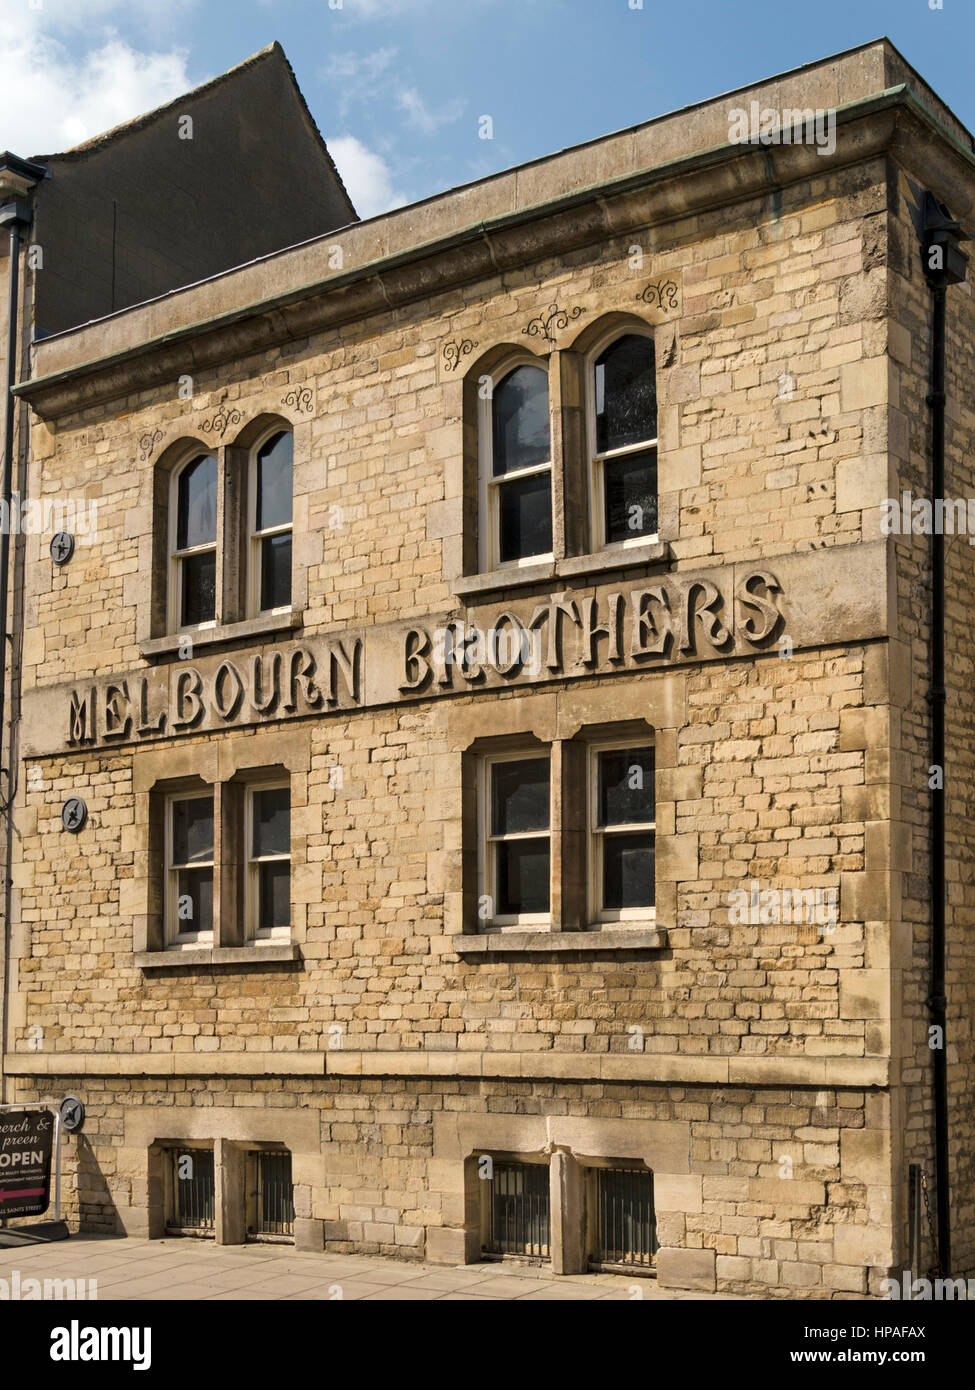 Melbourn Brothers Brewery sign, Stamford, Lincolnshire, England, UK Stock Photo